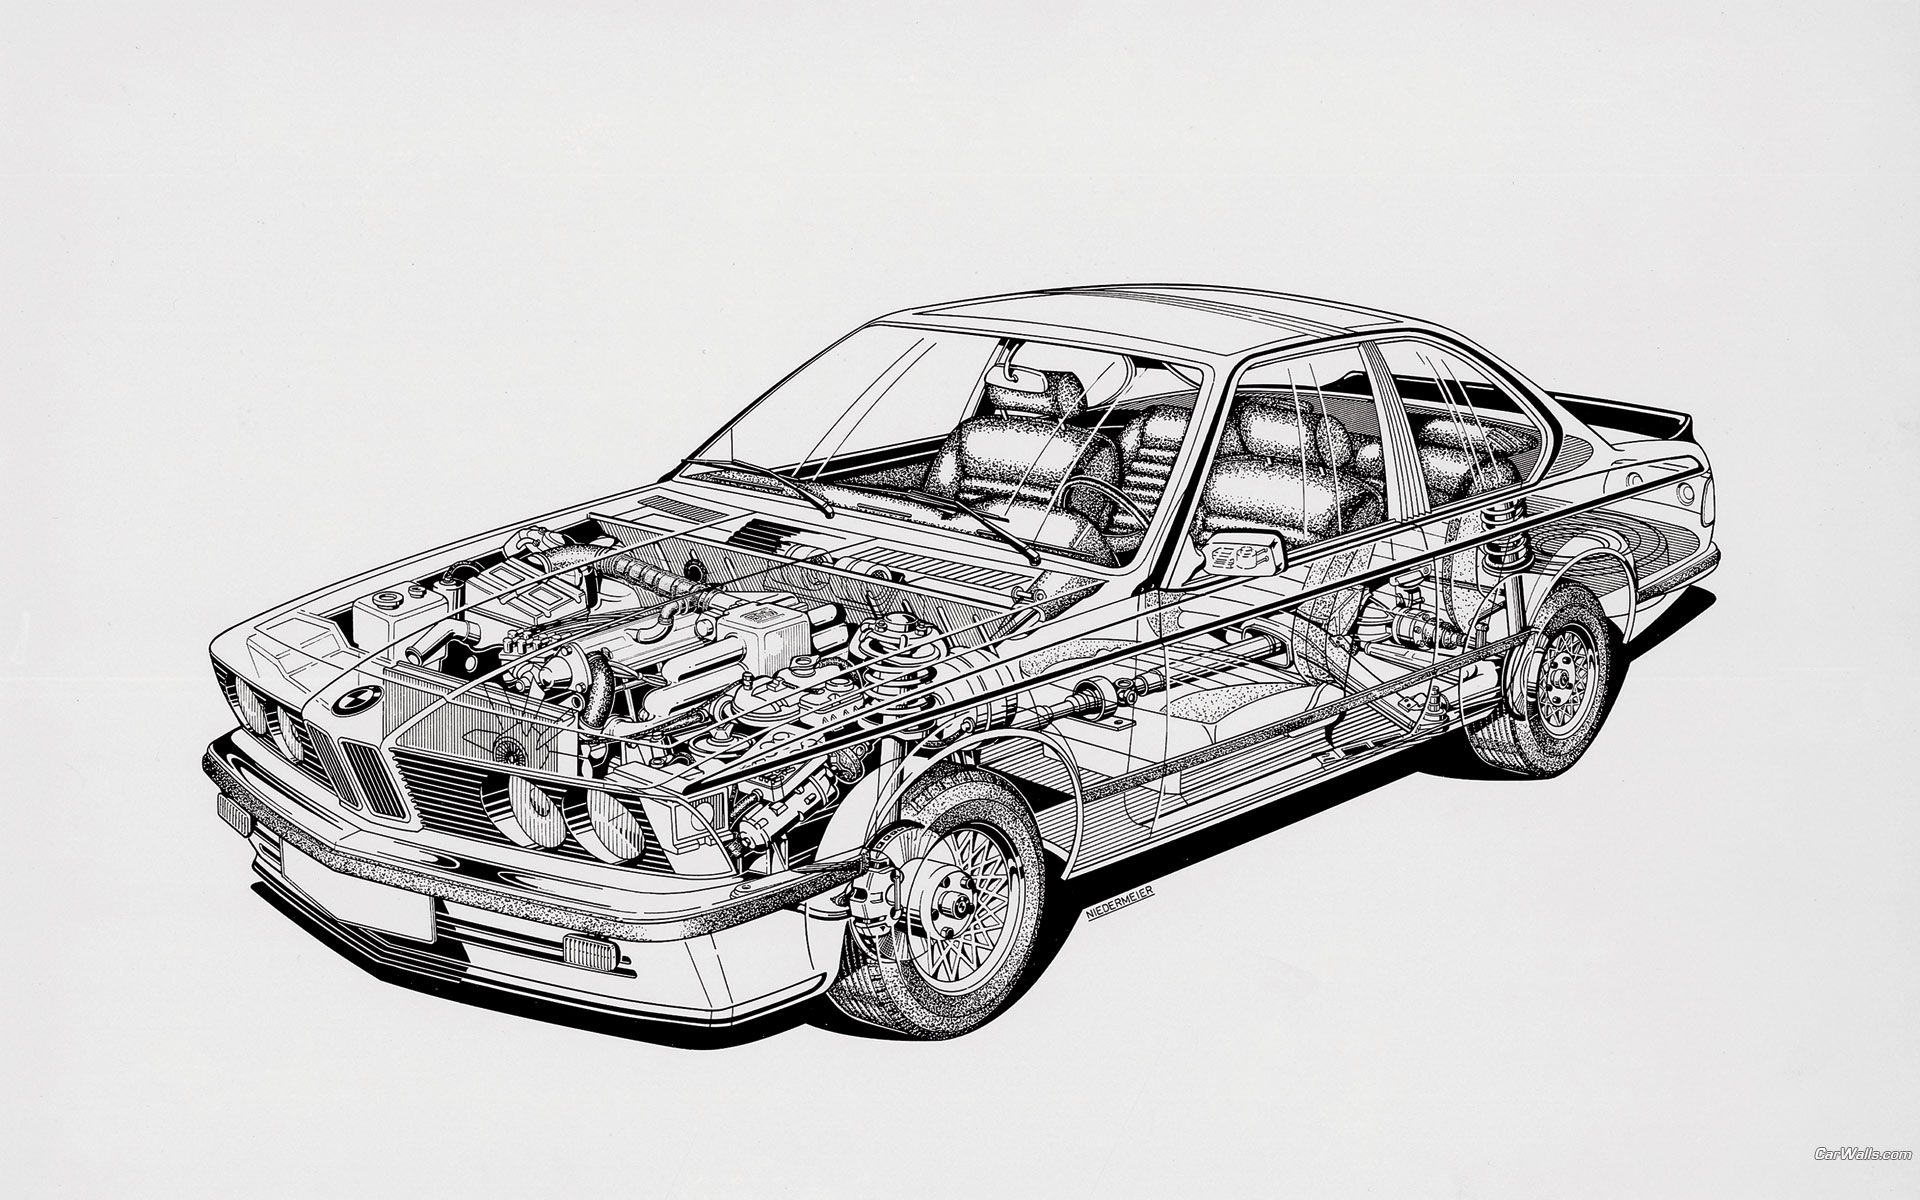 Download High quality 6 series circuit drawing Bmw wallpaper / 1920x1200